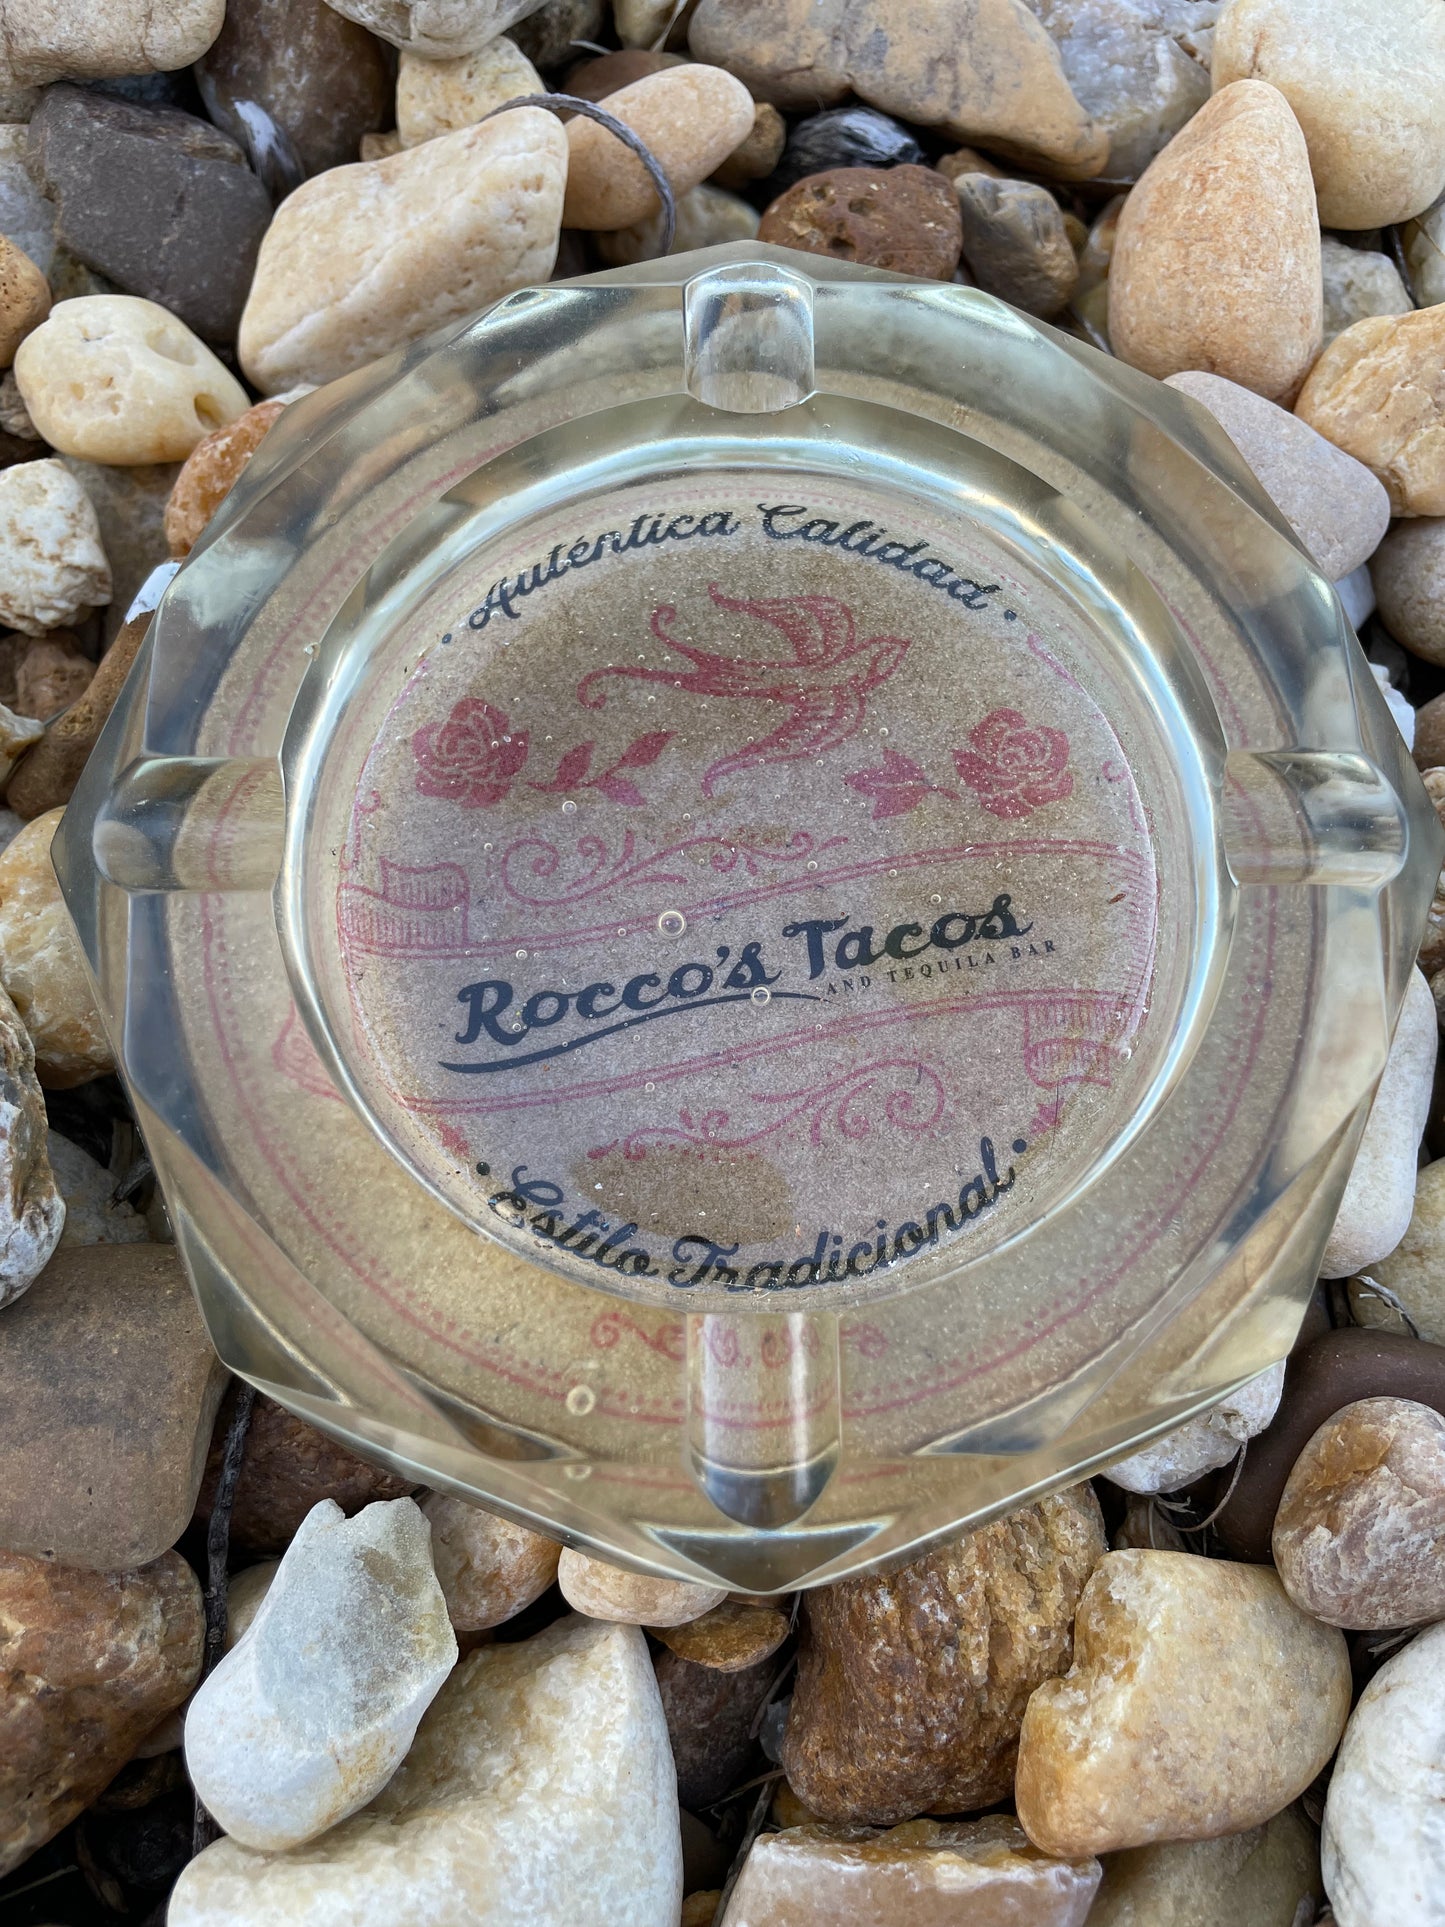 Rocco’s Tacos and Tequila Bar Restaurant Ashtray